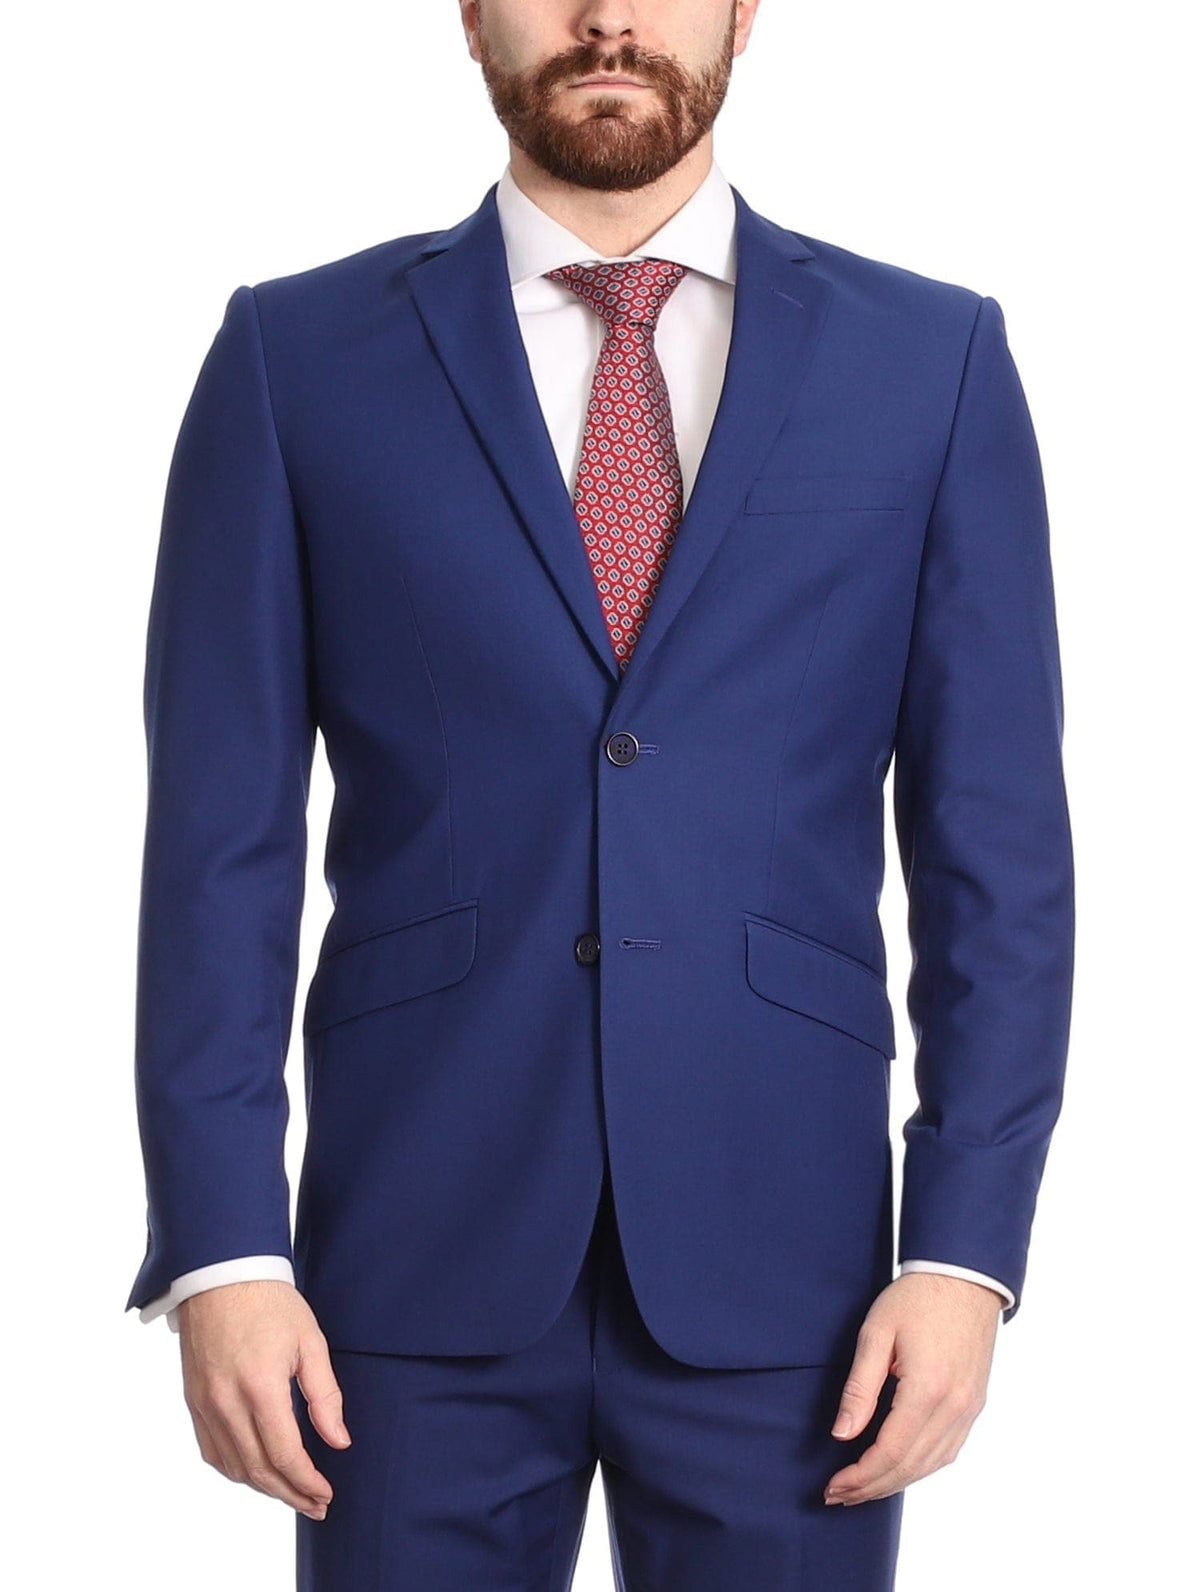 Label M Mens Classic Fit Two Button 100% Wool Wrinkle Resistant Suit - Royal Blue